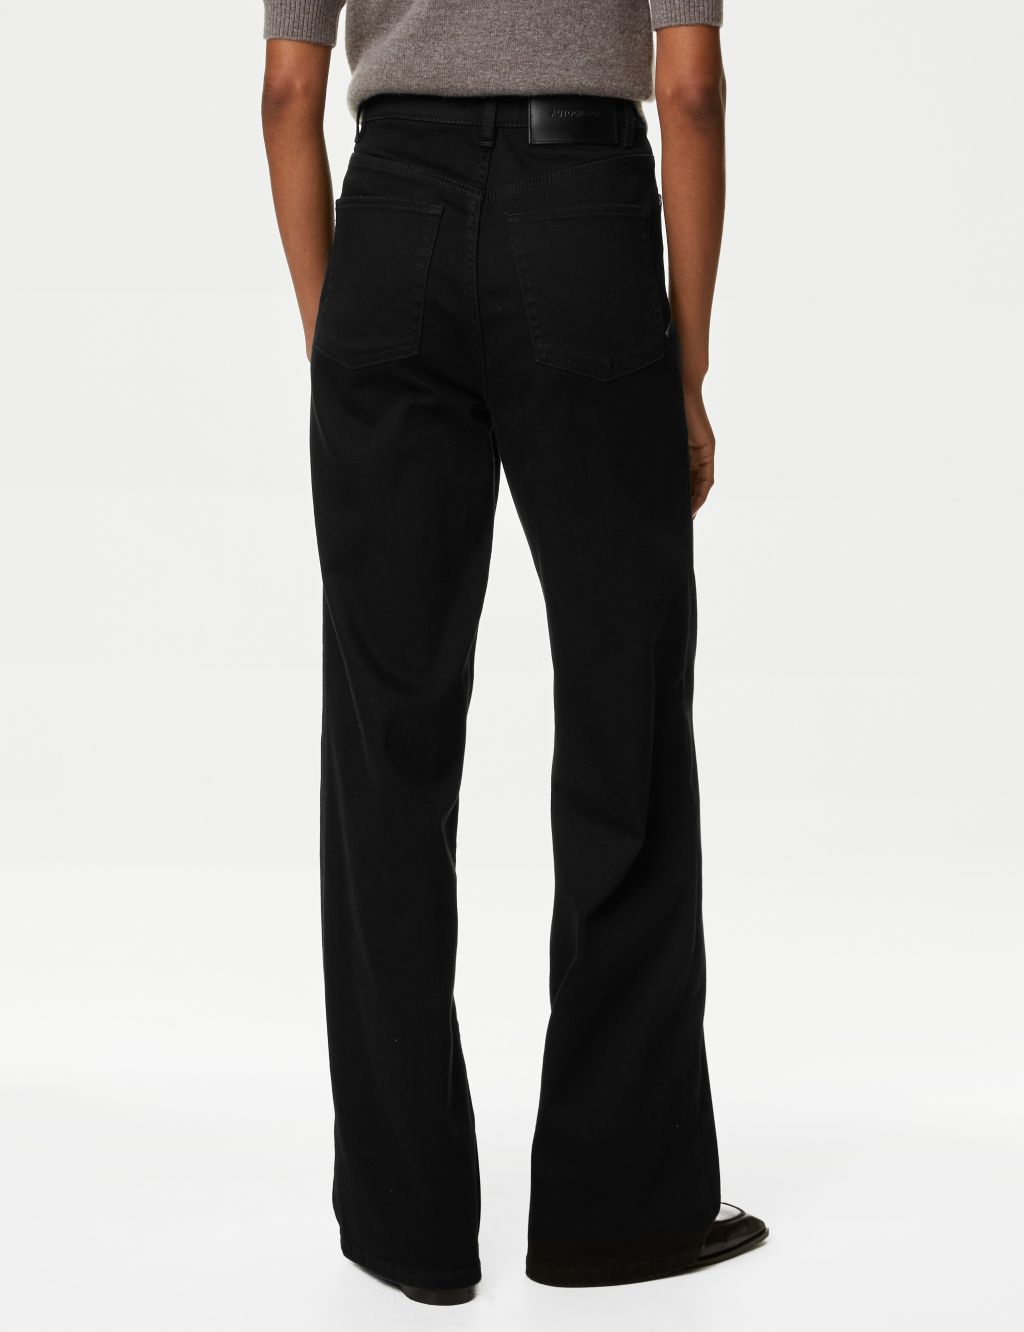 Lyocell™ Blend High Waisted Wide Leg Jeans image 5